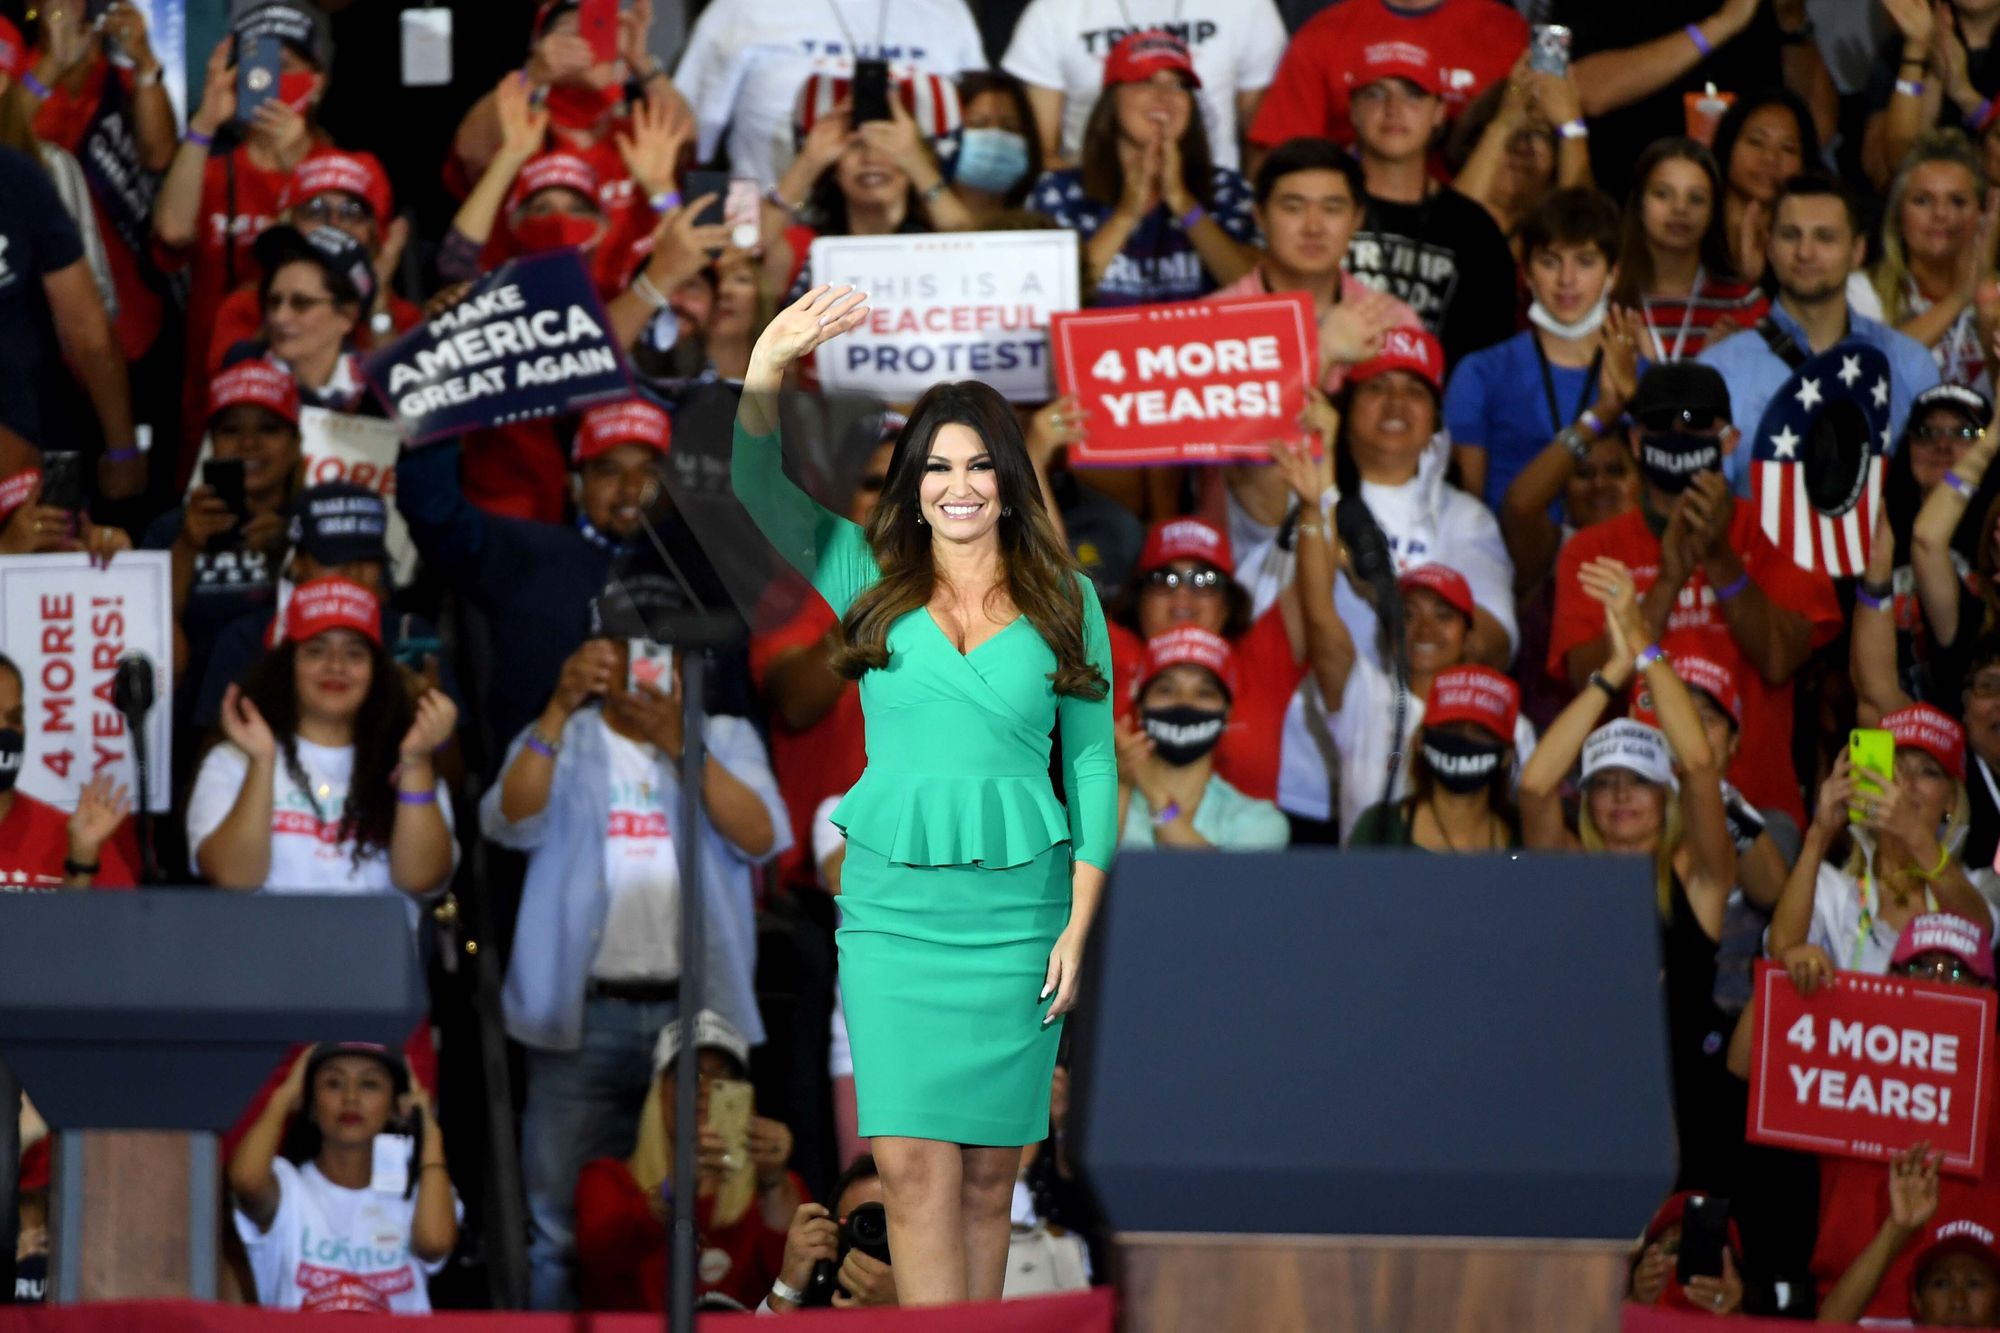 Texts Show Kimberly Guilfoyle Bragged About Raising Millions for Rally That Fueled Capitol Riot (propublica.org)